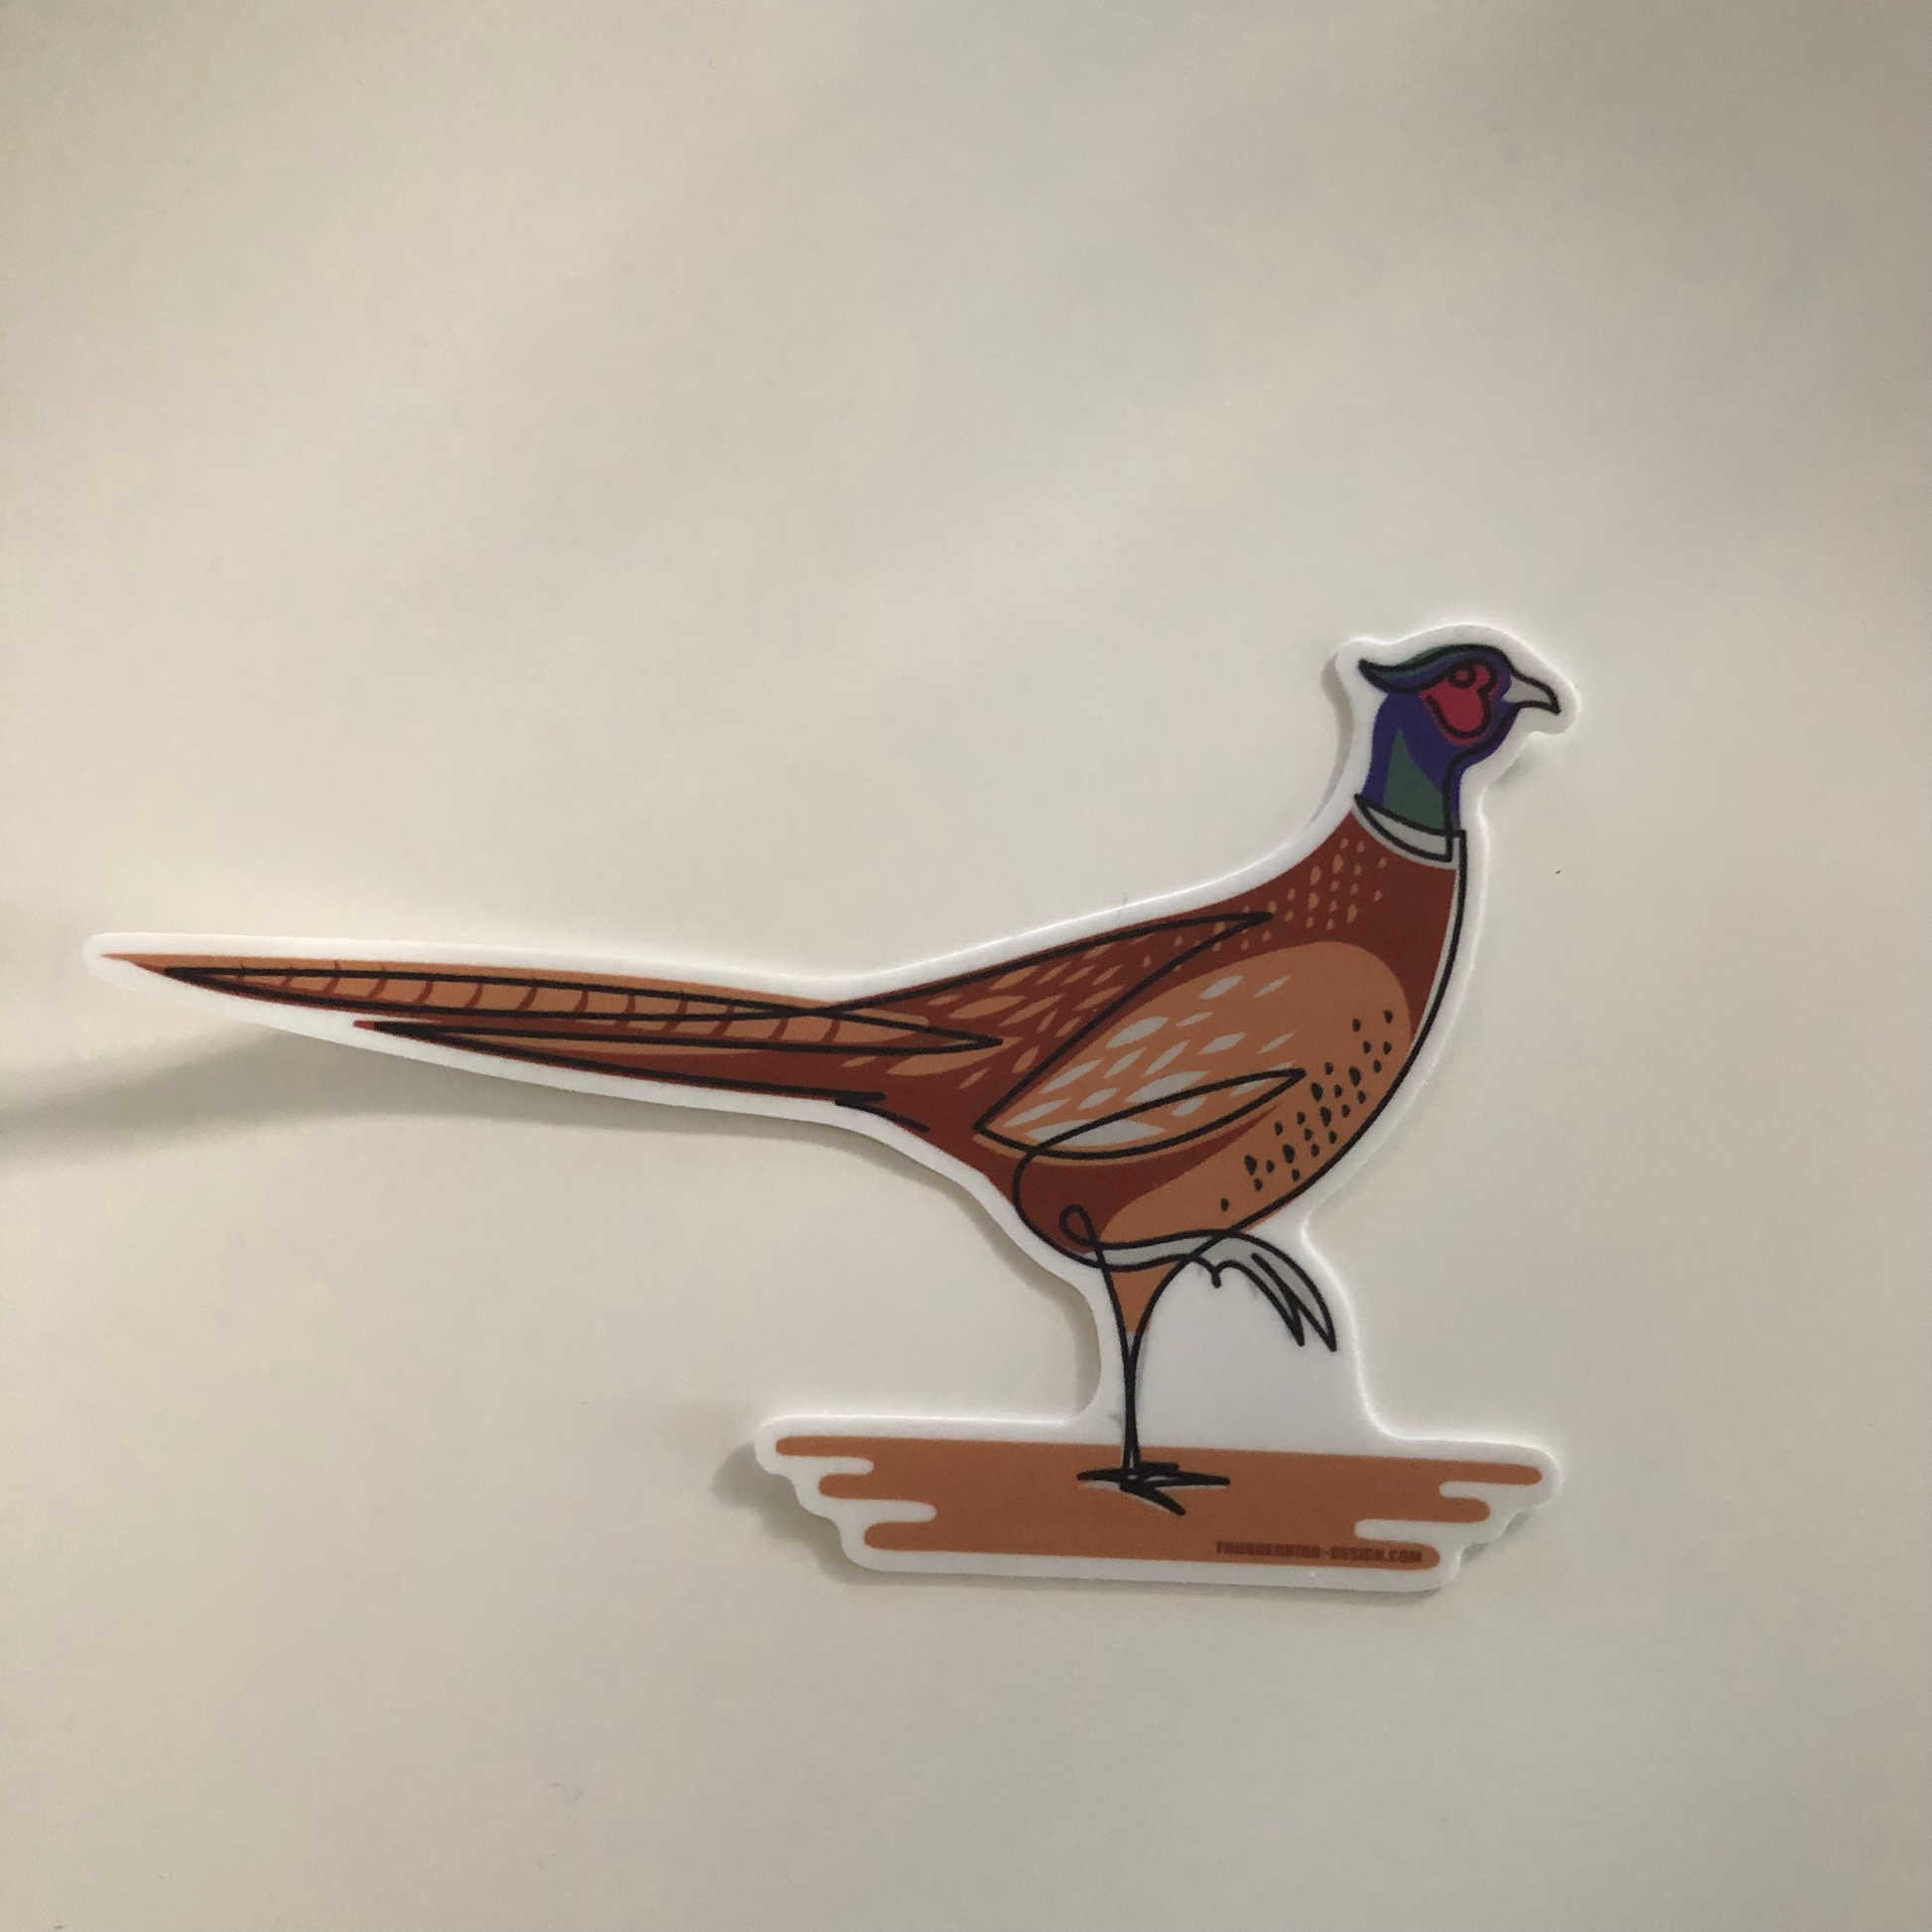 Thunderbird Outdoor SupplyPheasant Upland Bird - Single Line Series Decal w/ Matte FinishPheasant Upland Bird - Single Line Series Decal
Single Line Contour Illustration of a Pheasant. Matte Weatherproof Vinyl Decal.Place one on your case, cooler, crate, bumper, water-bottle, or anywhere else.
Size :